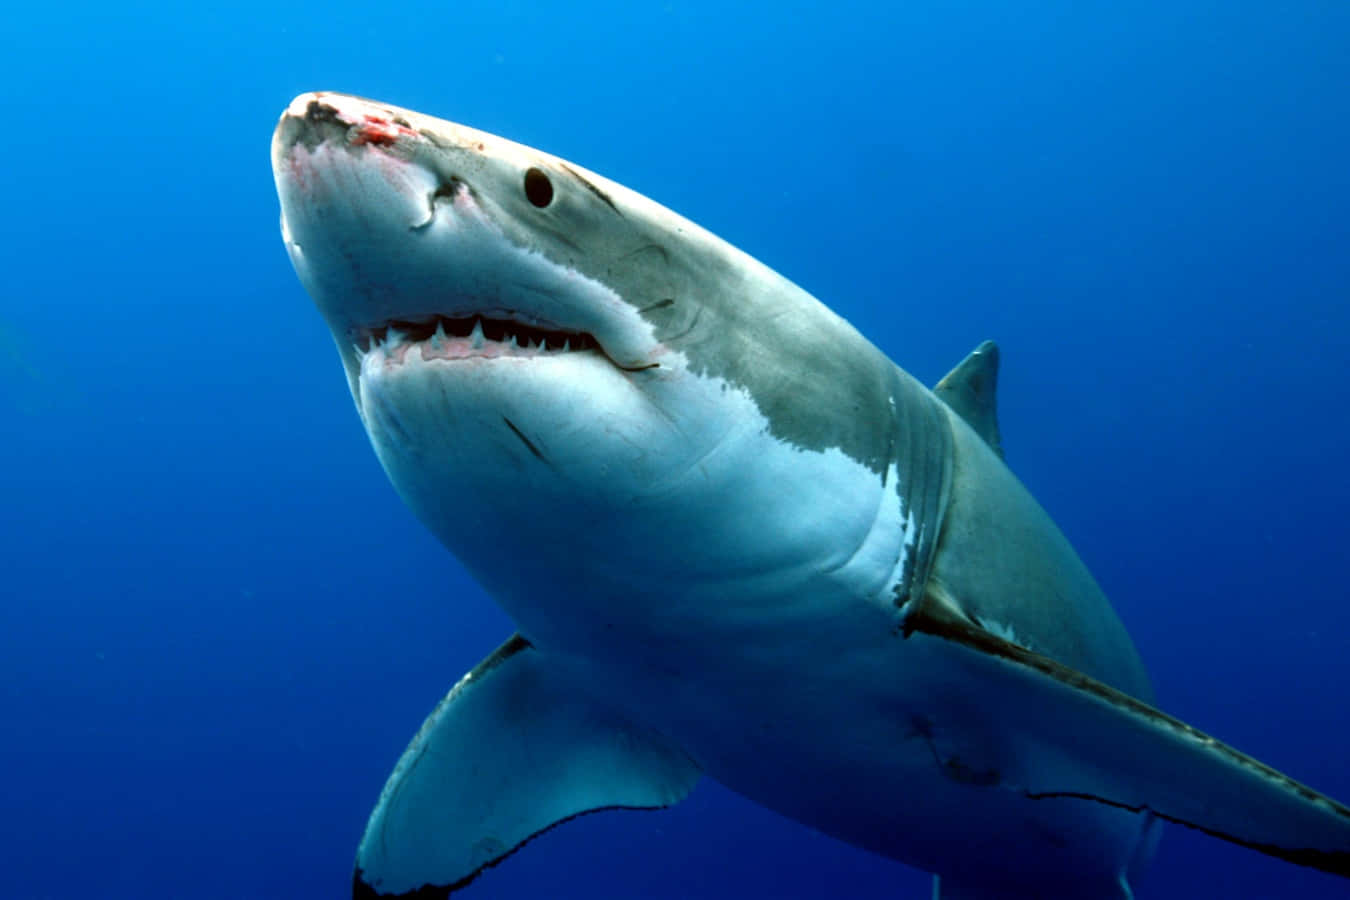 Up Close and Personal with a Great White Shark